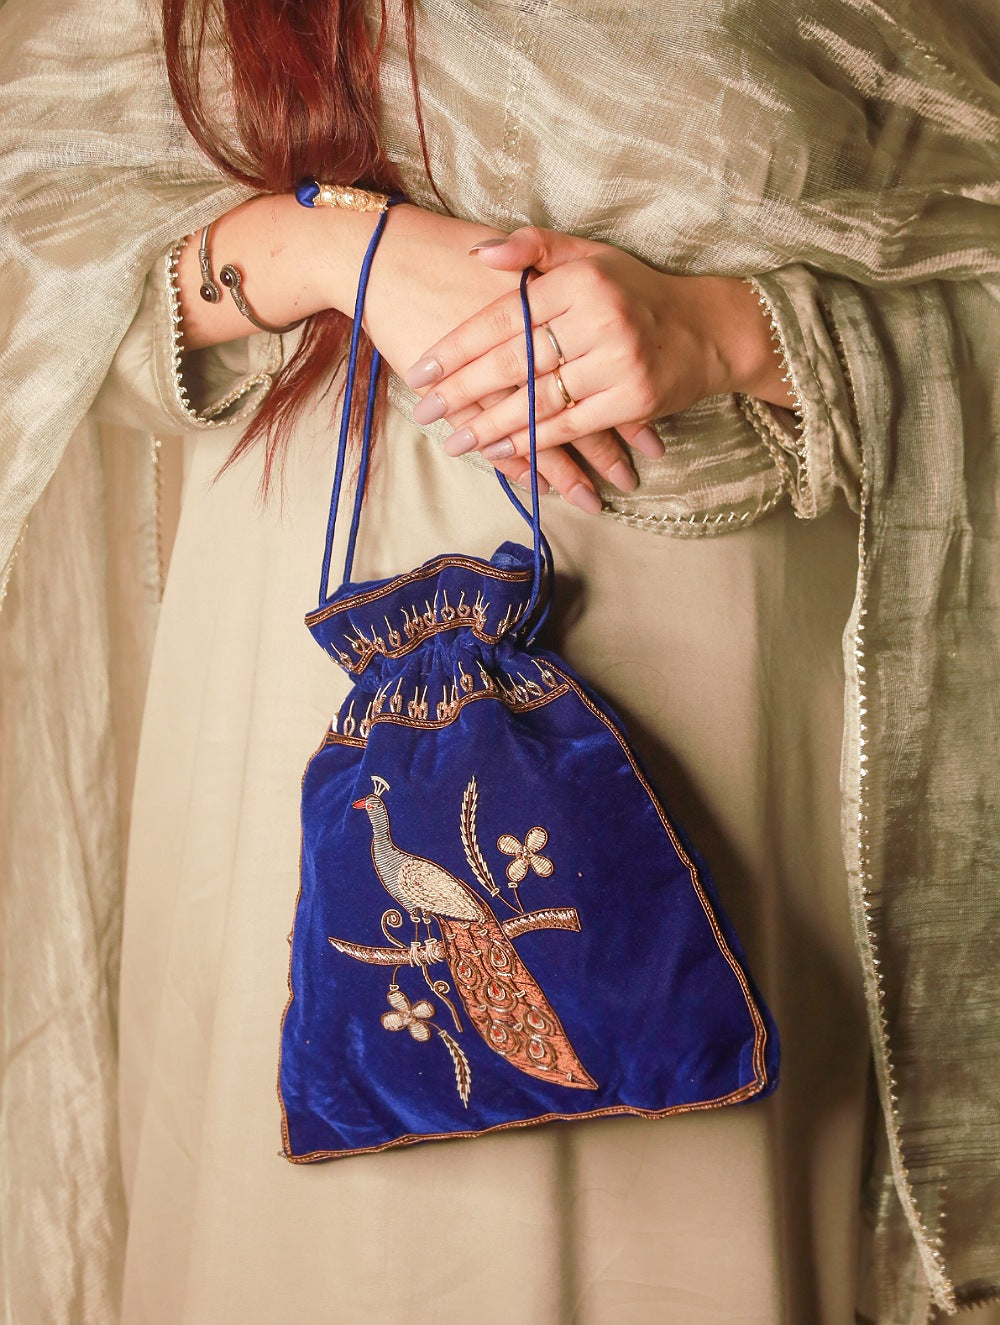 Load image into Gallery viewer, Zardozi and Resham Embroidered Evening Potli Bag - Deep Blue Peacock